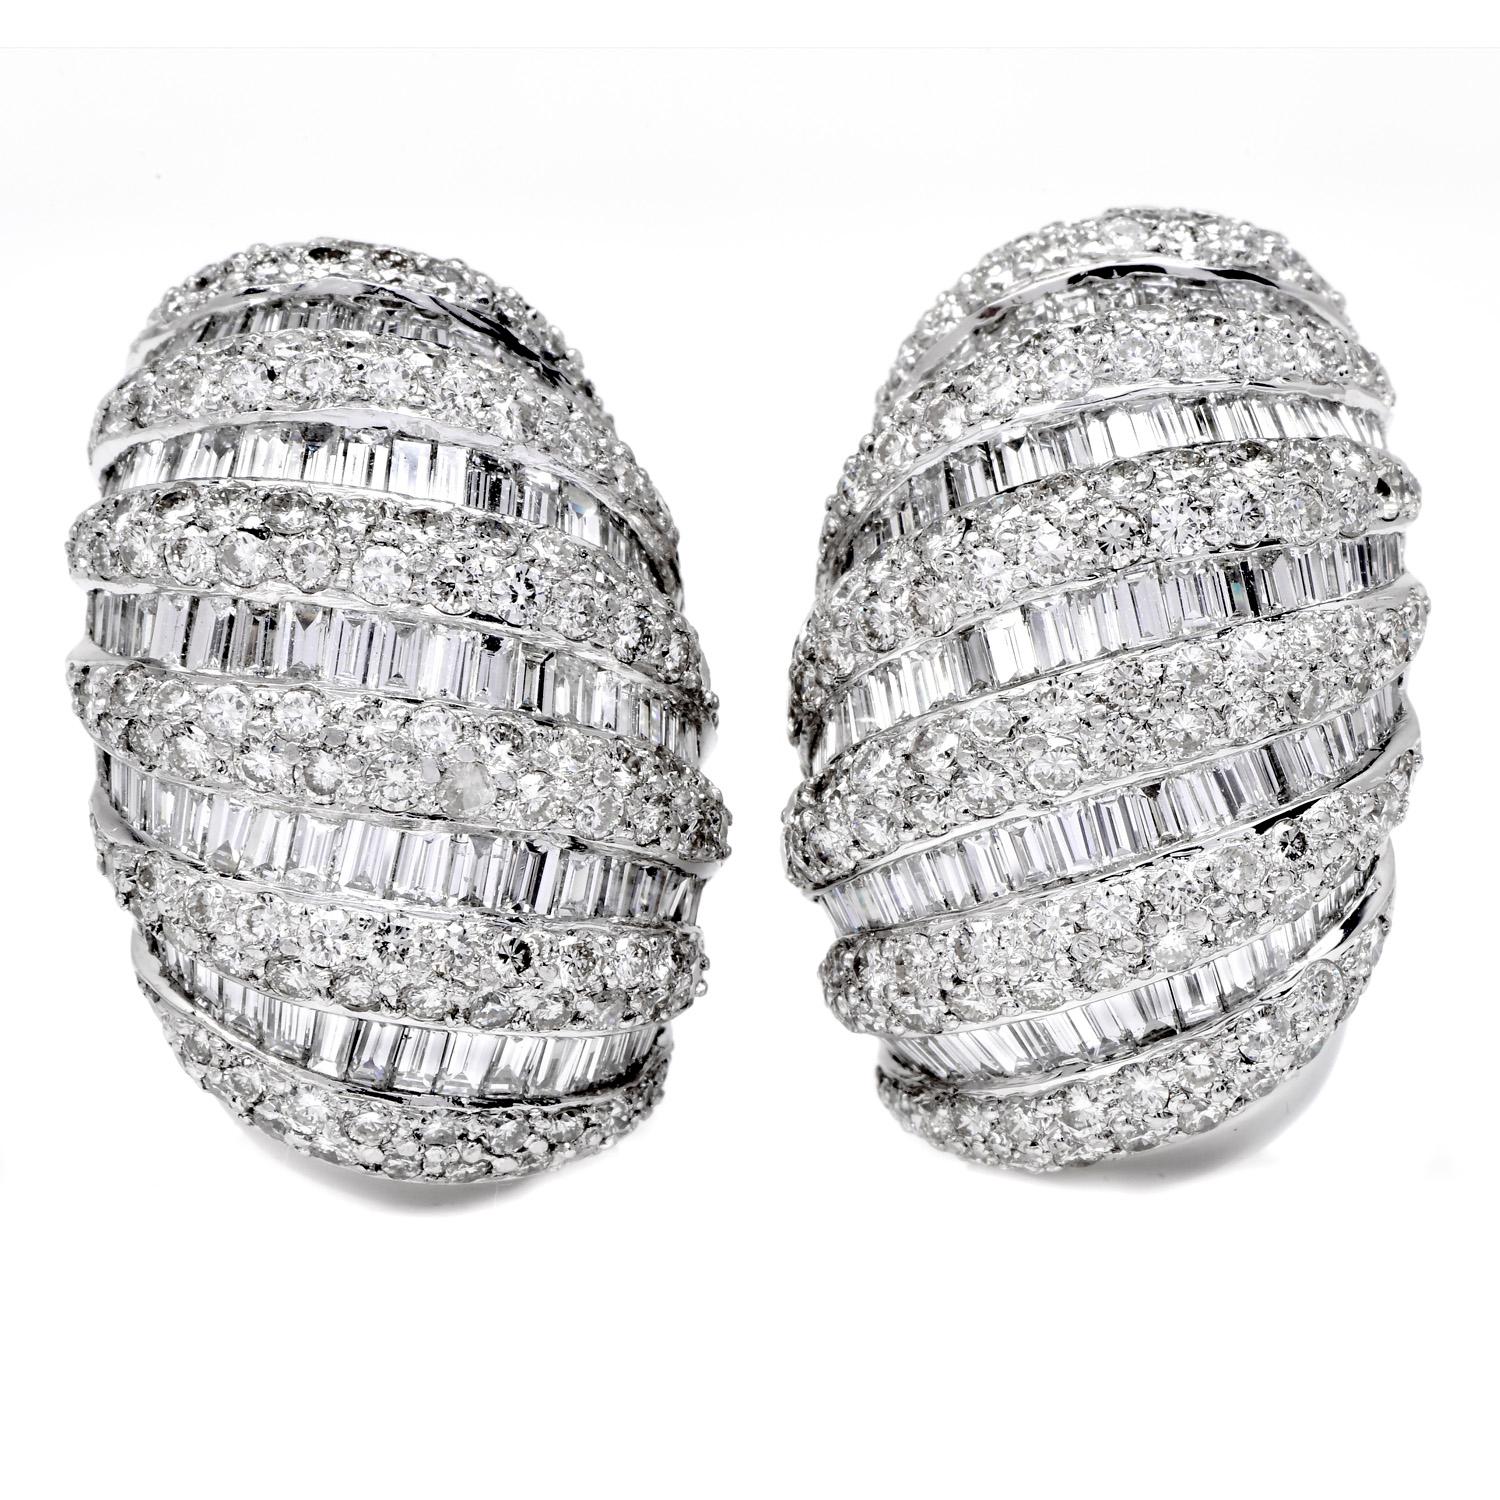 These earrings were created with unbridled imagination and

inspired by a shell Shrimp motif. Exclusively handcrafted in platinum, 

these hoop earrings measure appx. 26mm long x 17mm wide.

Rows of vibrant white round and baguette diamonds cascade